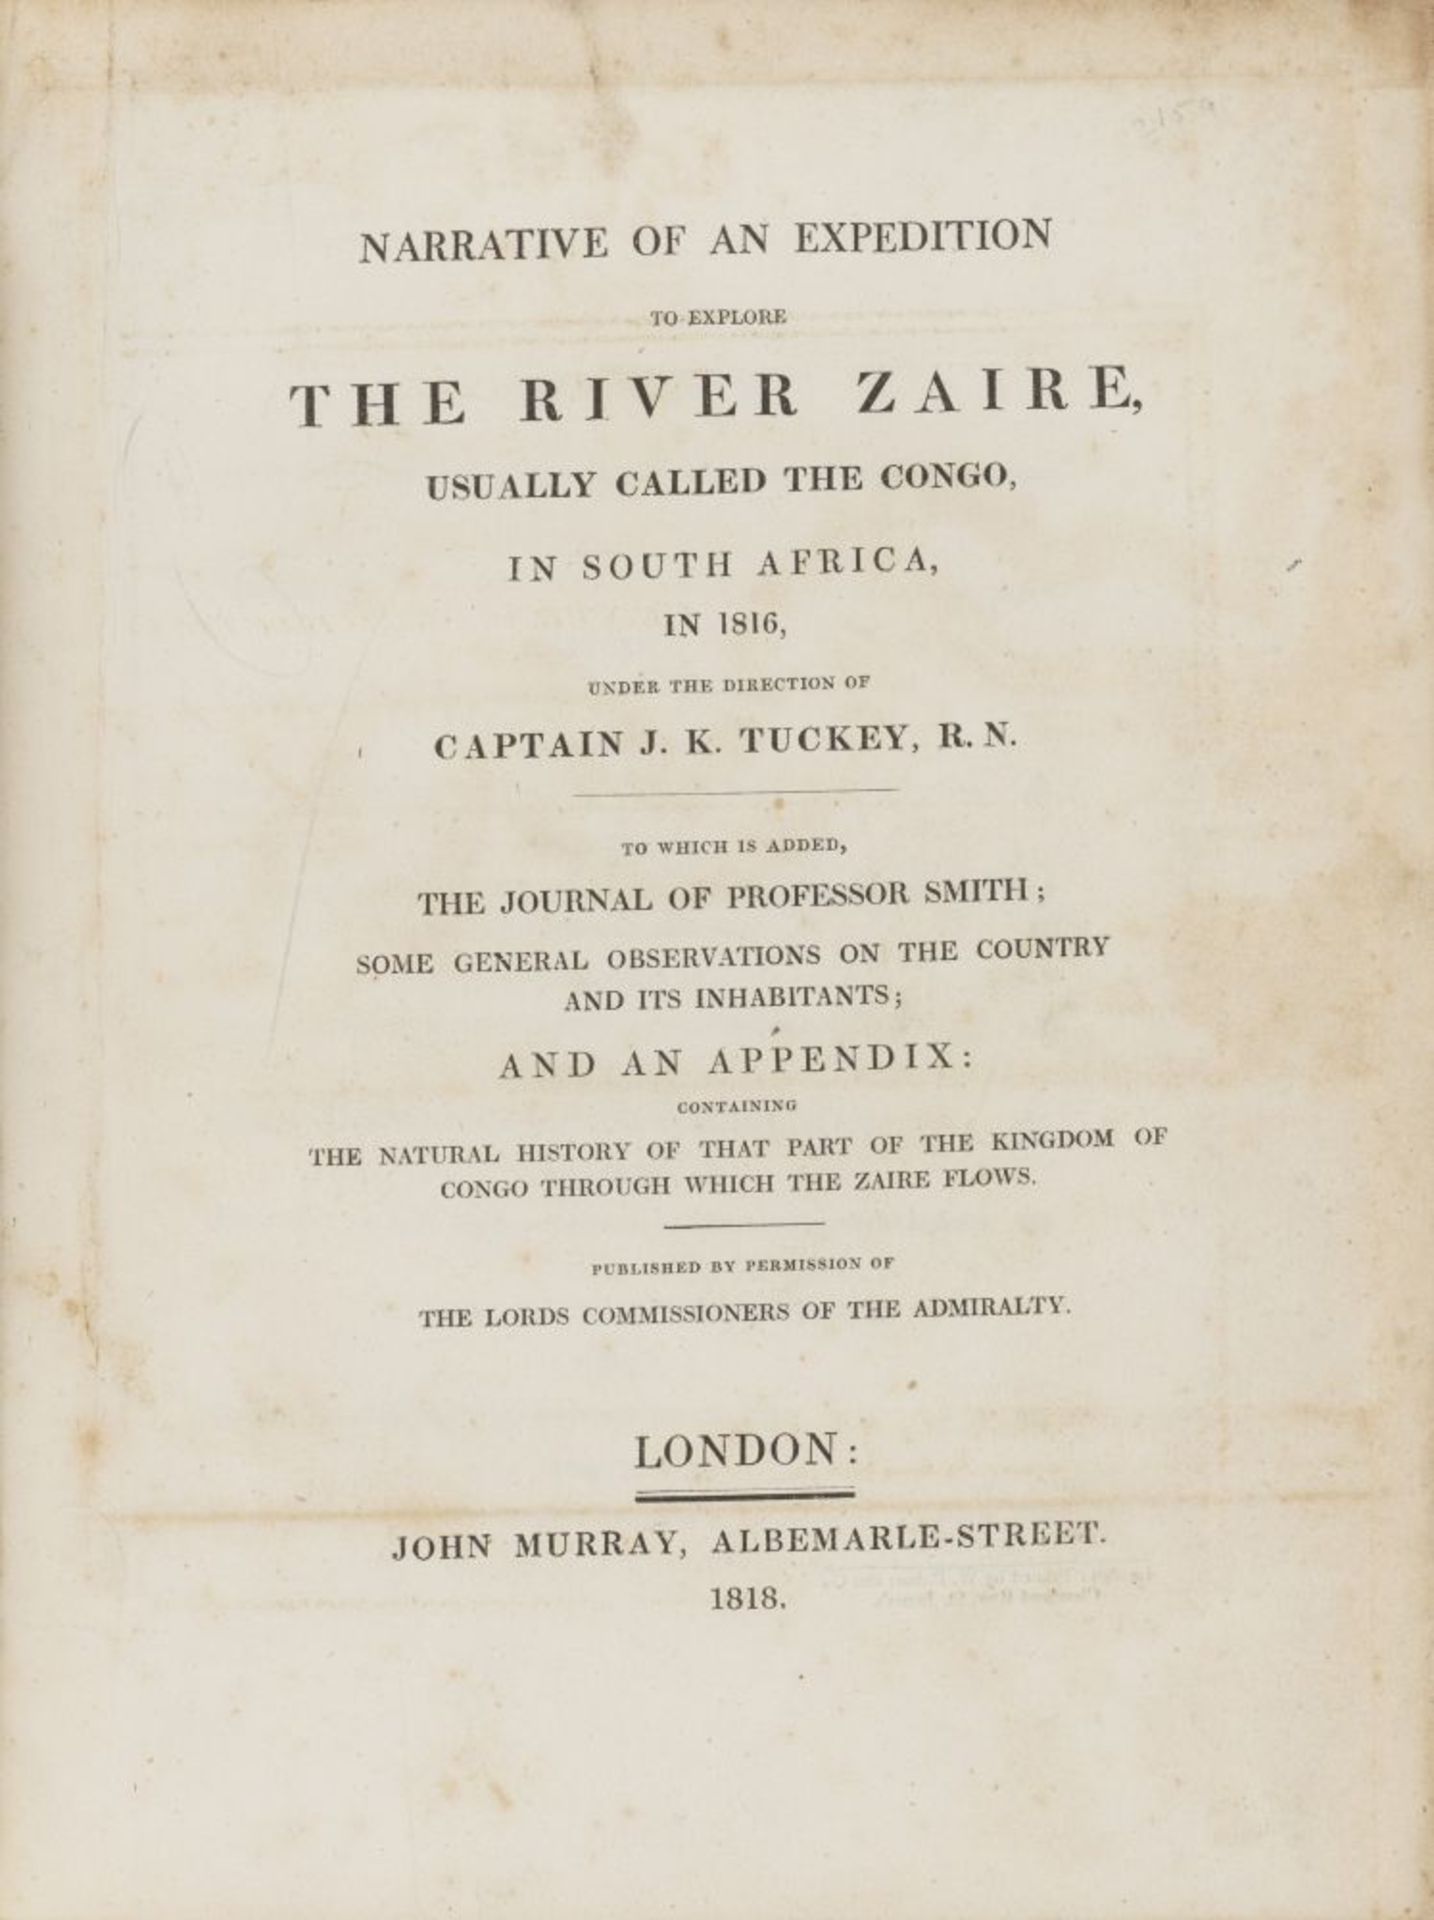 J.K. Tuckey, Narrative of an expedition to explore the river Zaire. Ldn 1818. - Bild 2 aus 3